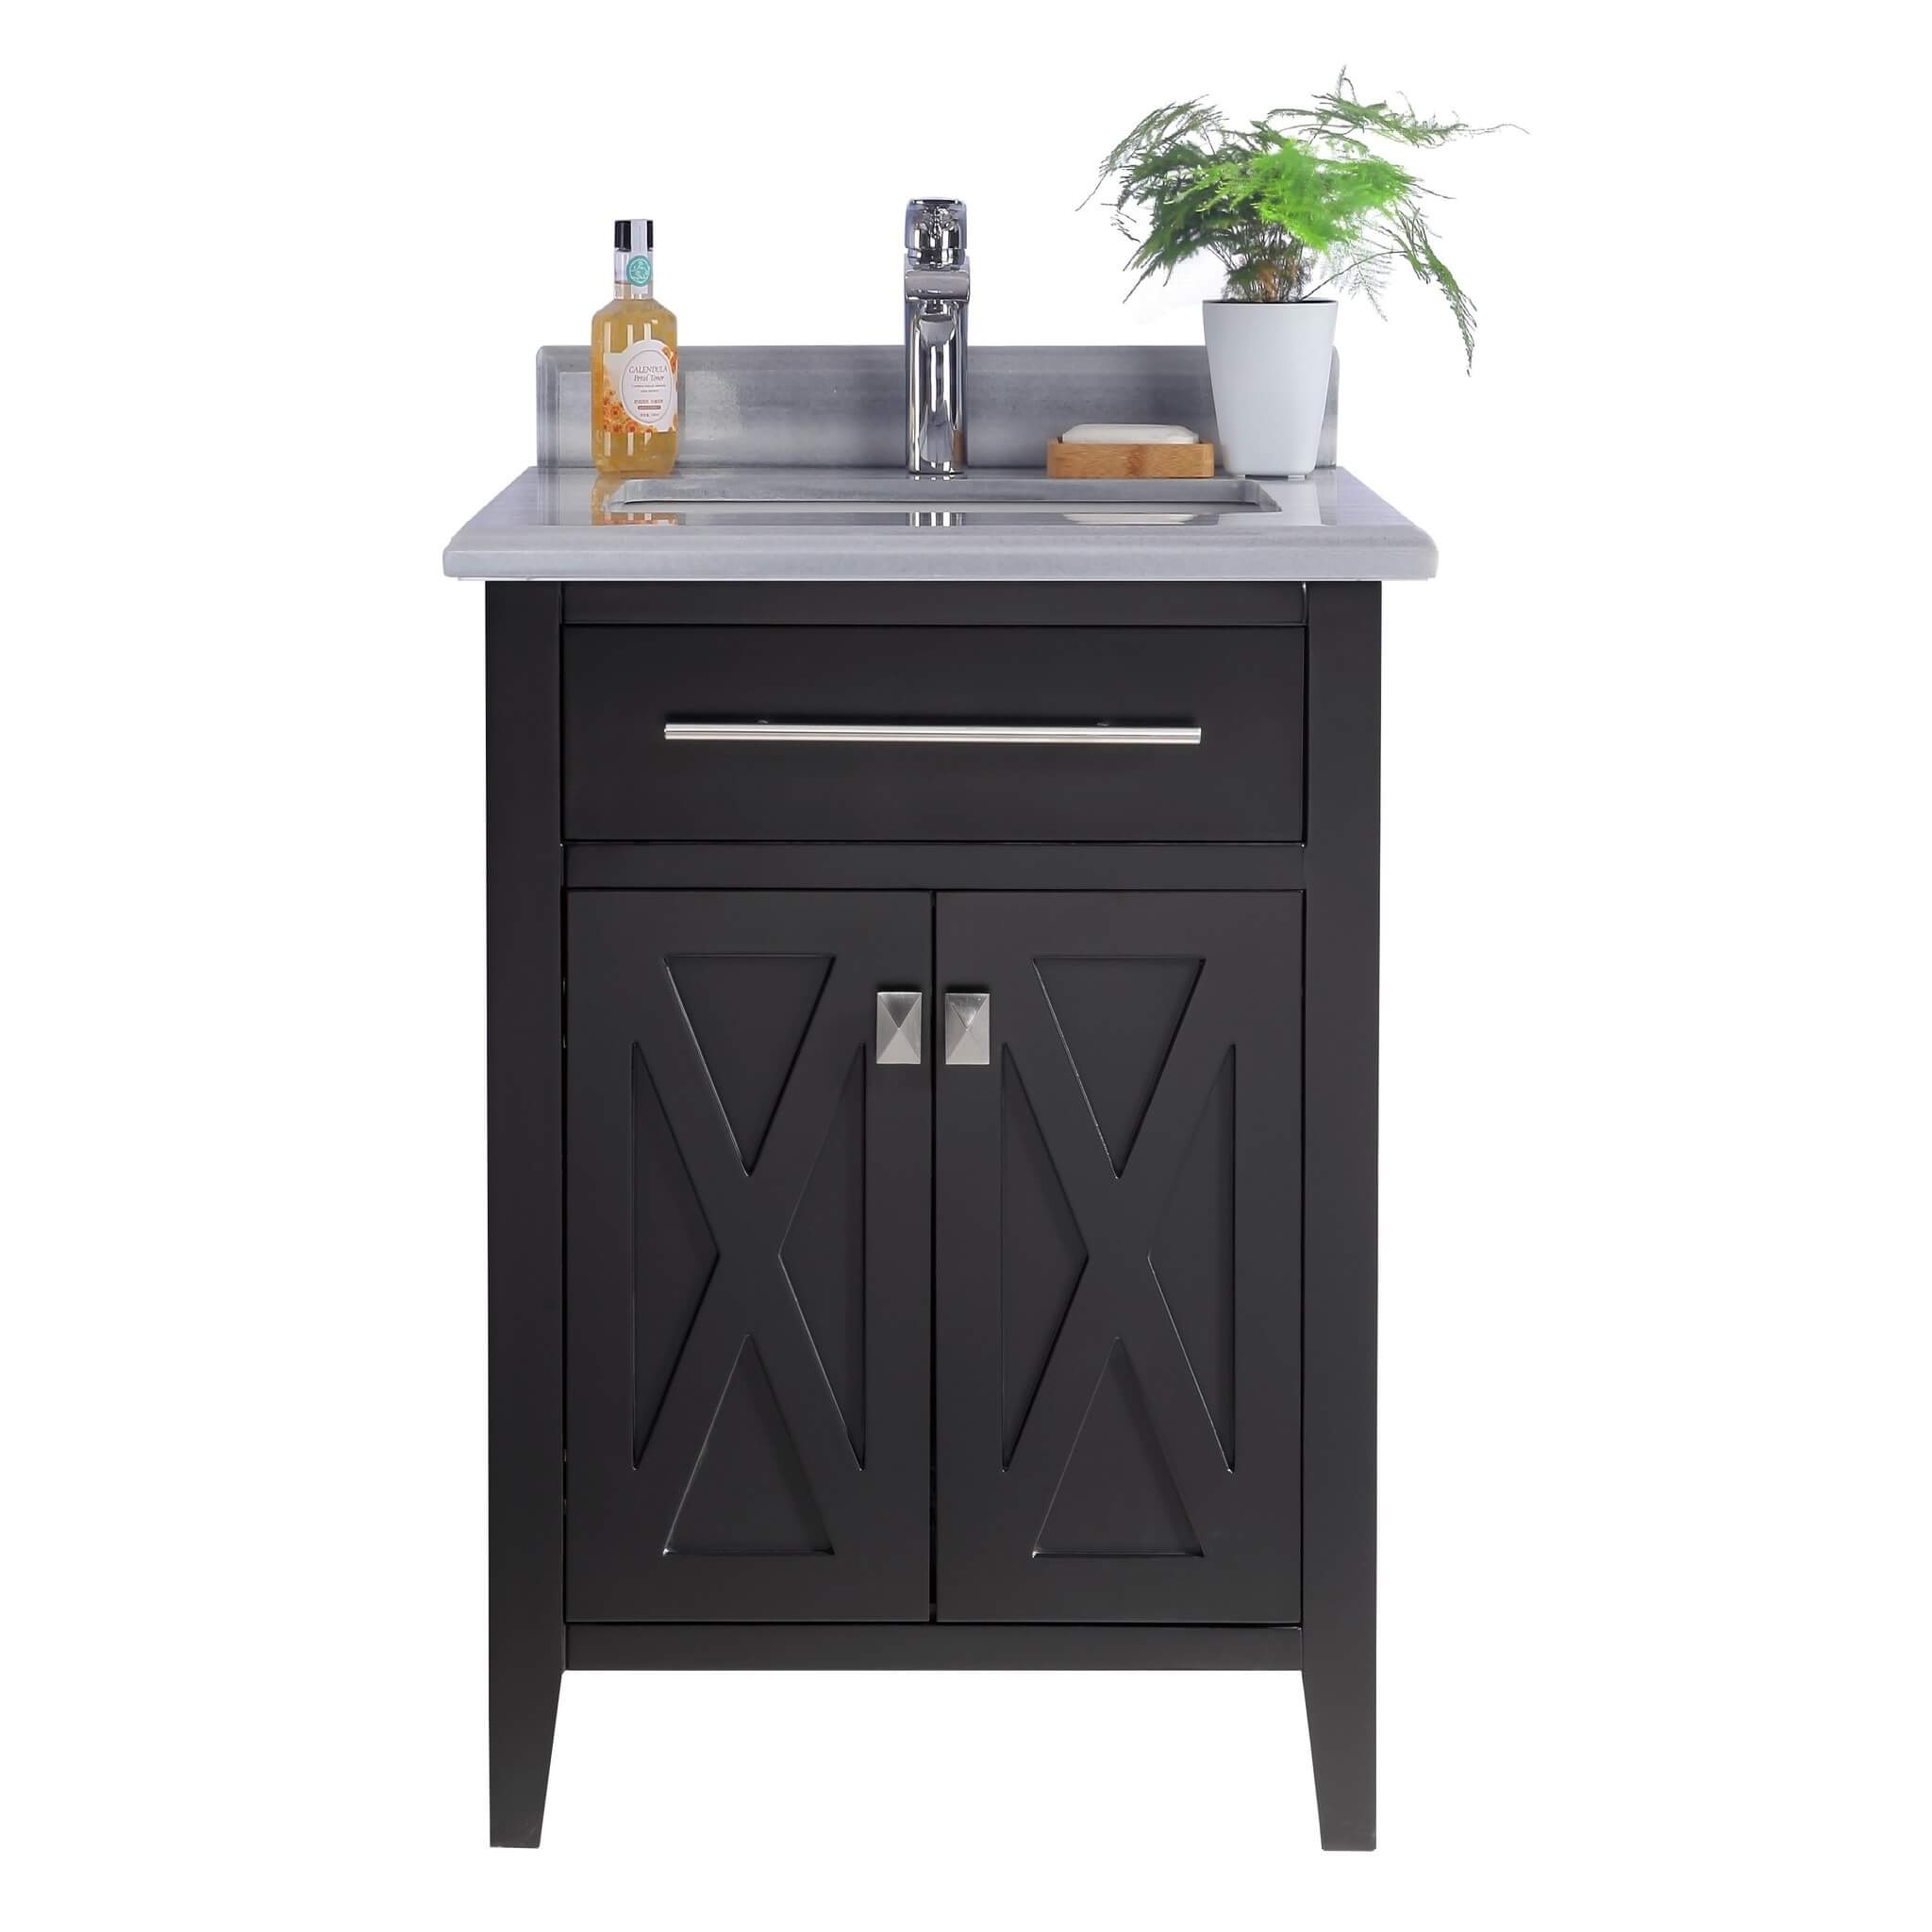 LAVIVA Wimbledon 313YG319-24E-WS 24" Single Bathroom Vanity in Espresso with White Stripes Marble, White Rectangle Sink, Front View